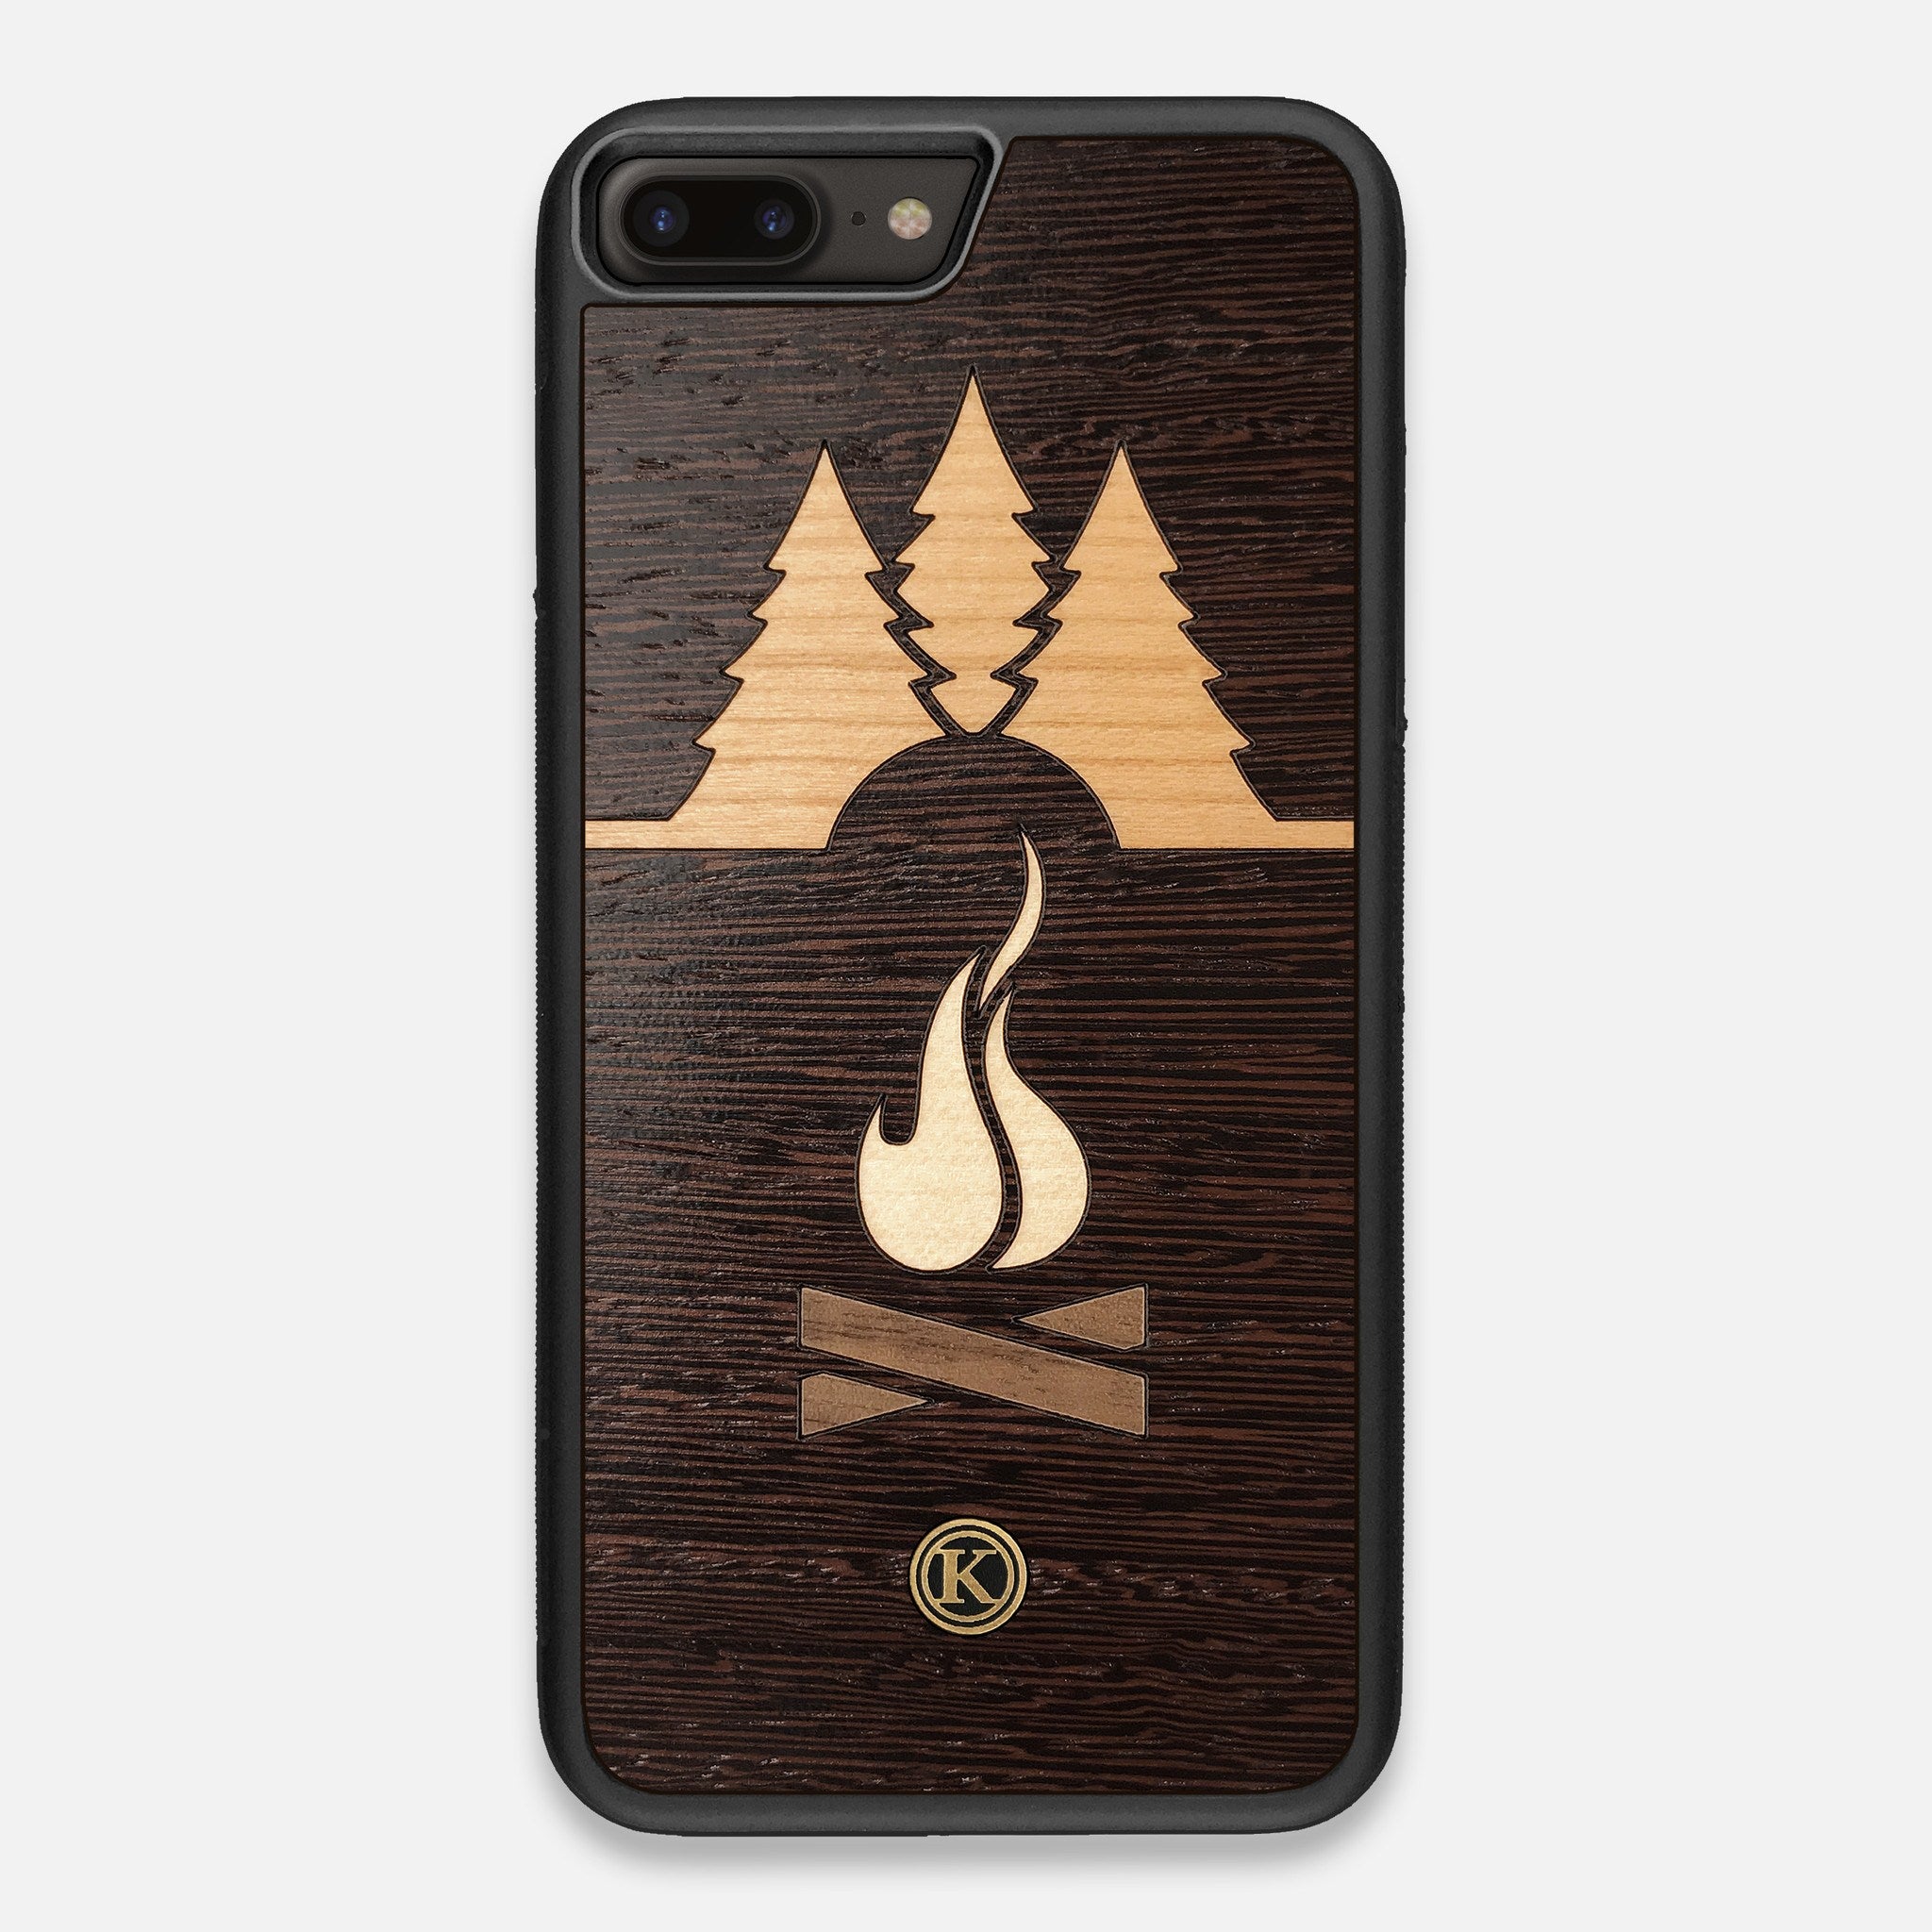 Front view of the Nomad Campsite Wood iPhone 7/8 Plus Case by Keyway Designs